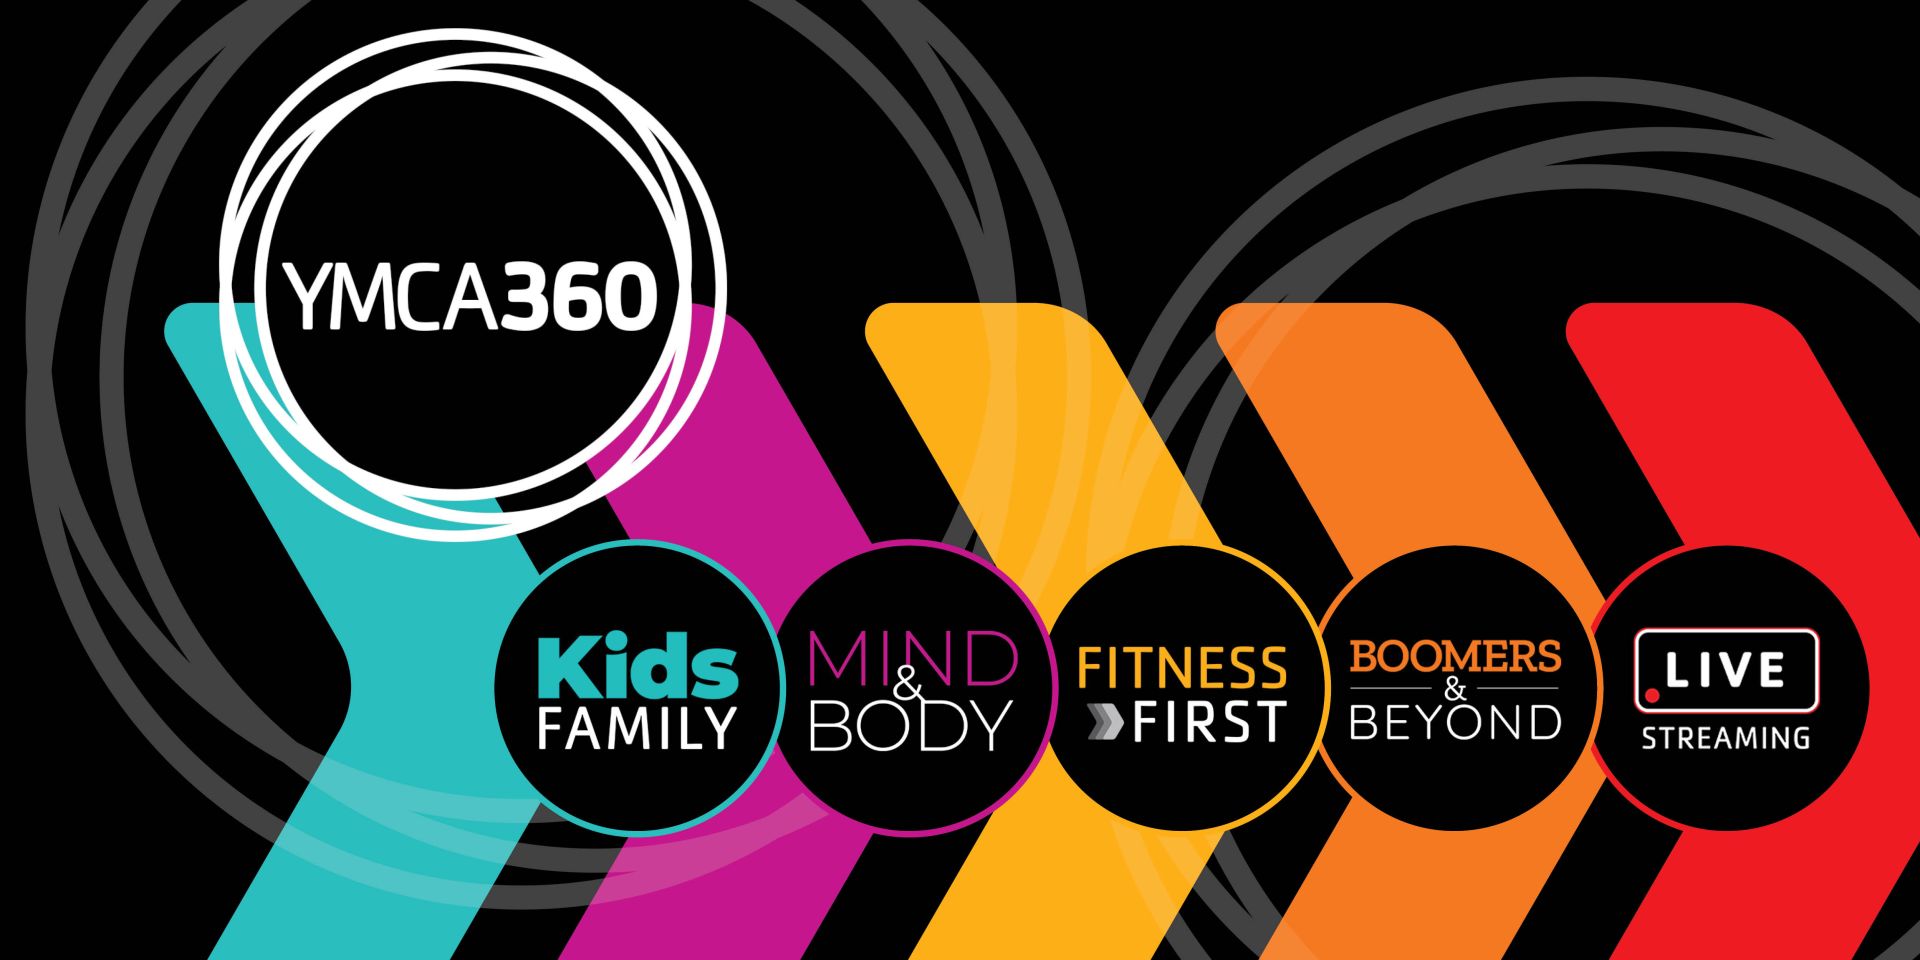 Click to Login to YMCA360